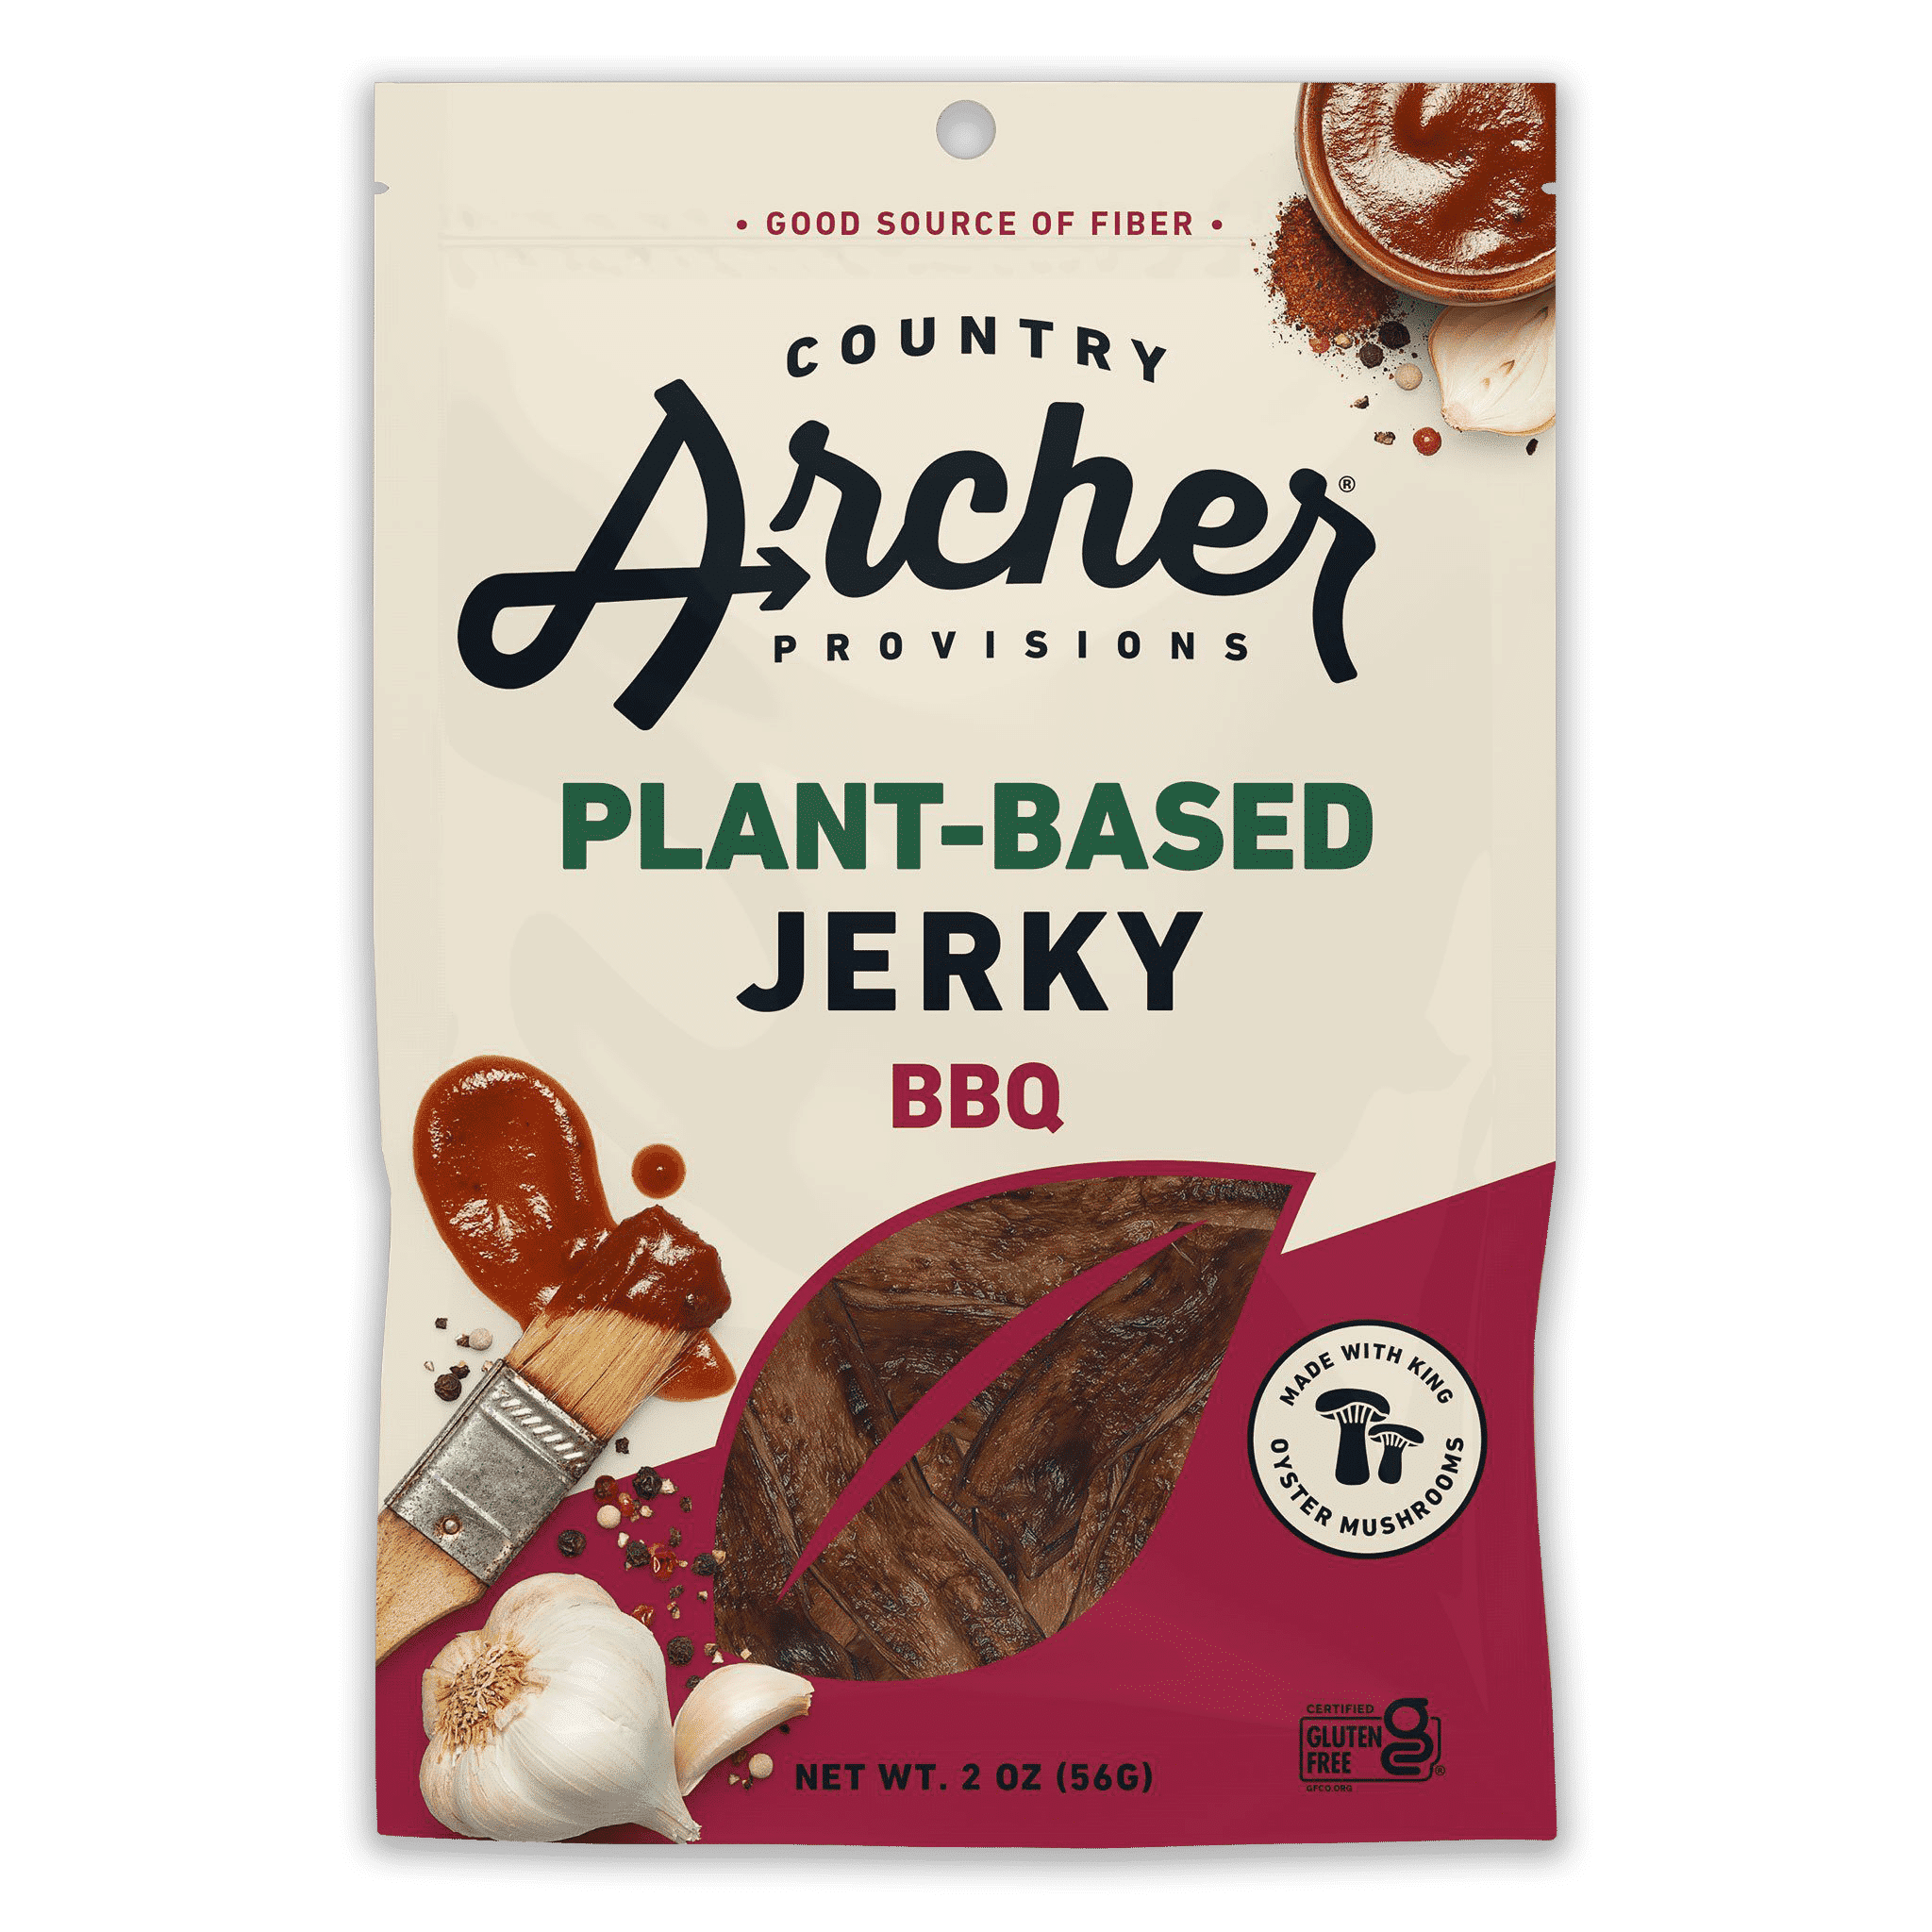 Grass-fed Beef Jerky Gift Pack  Country Archer – Country Archer Provisions